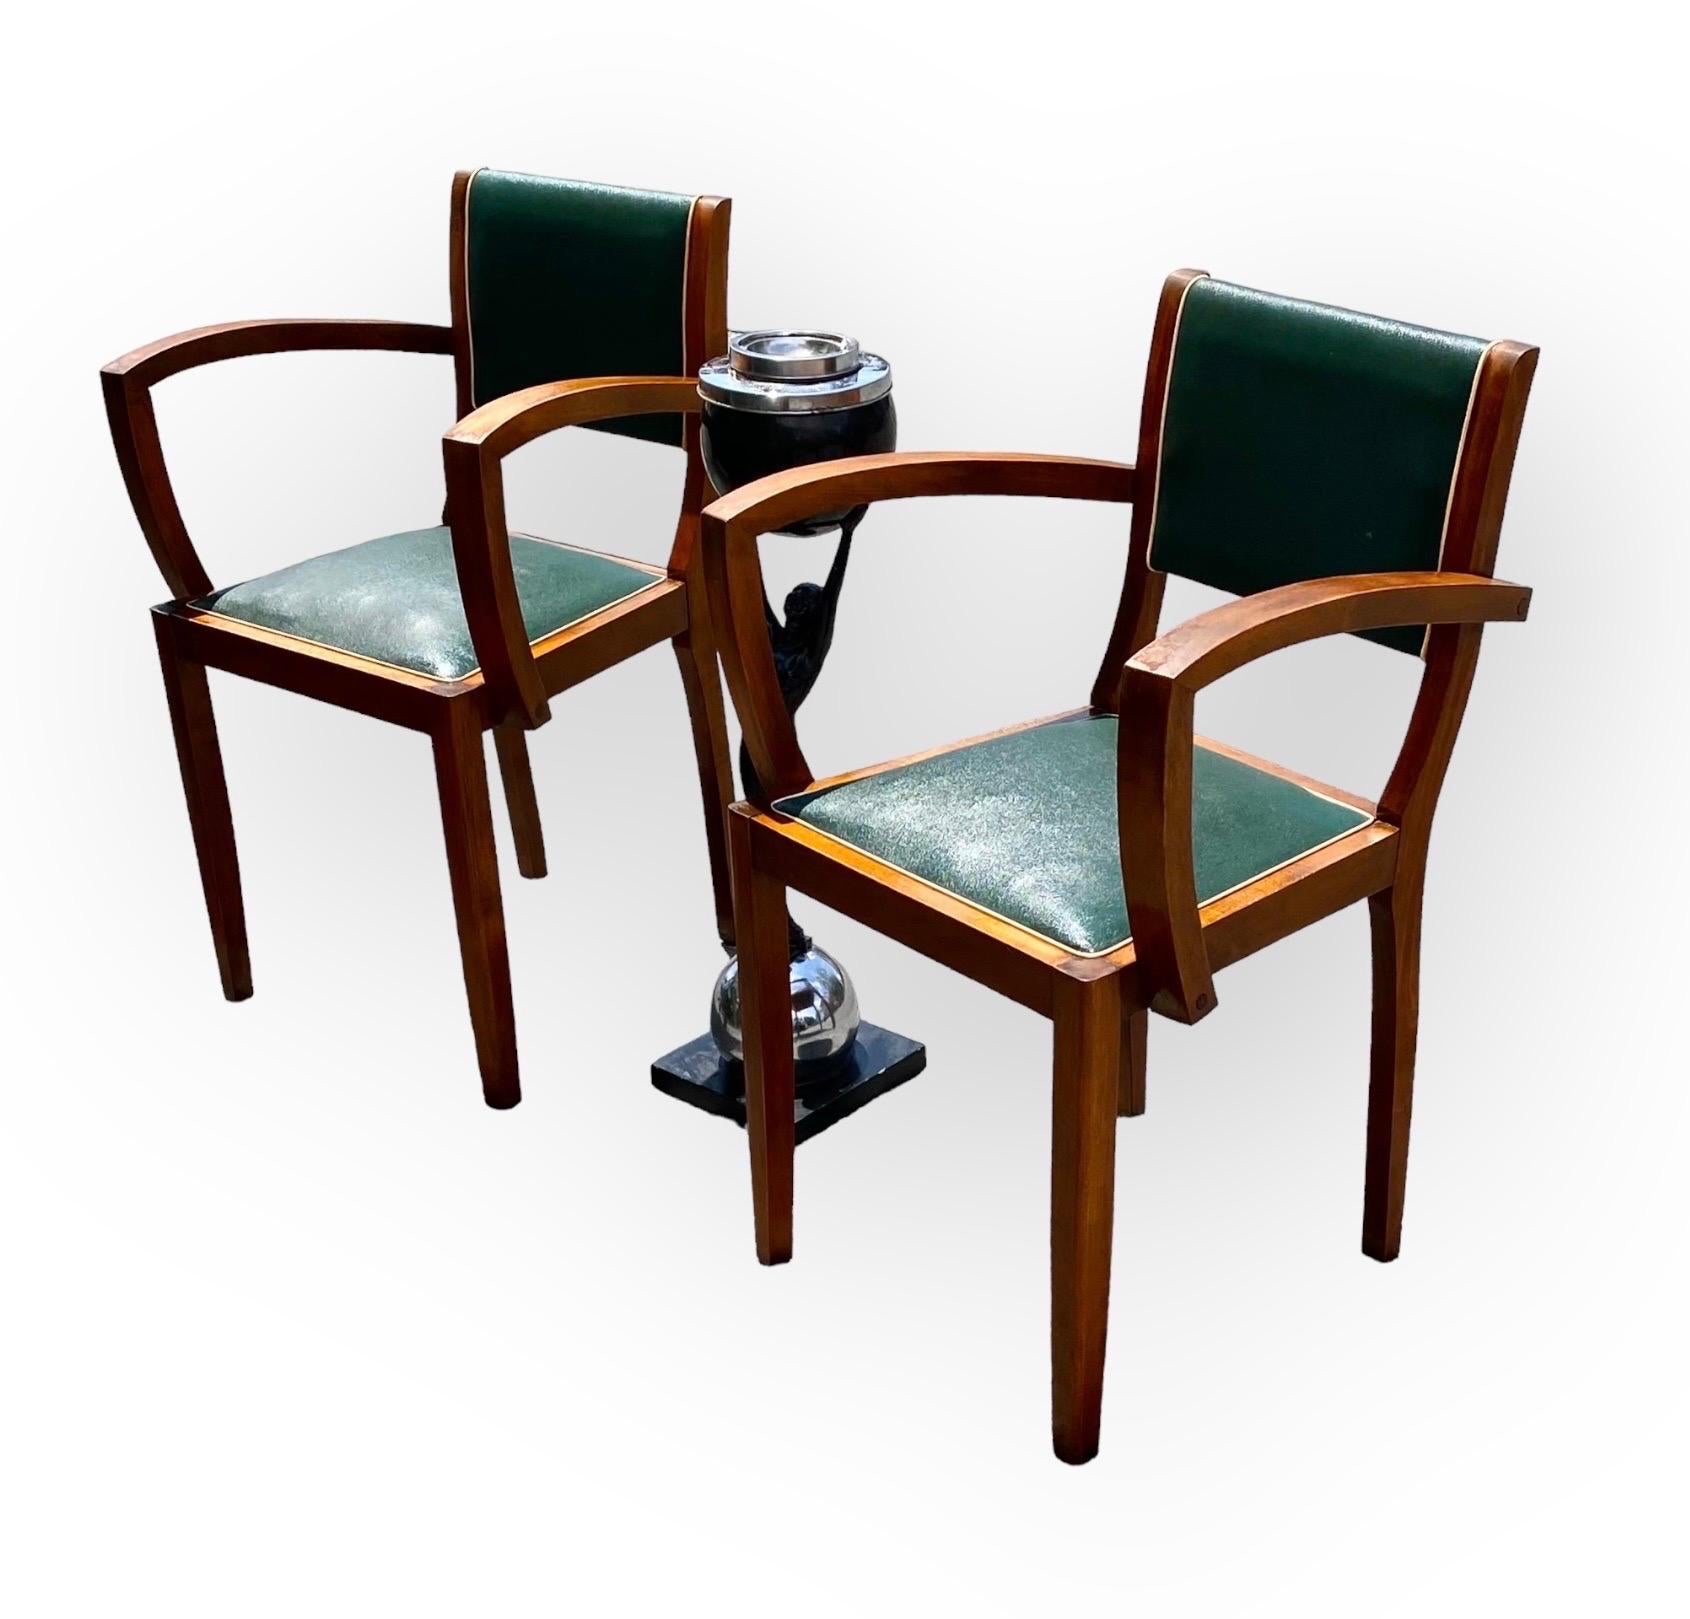 Pair of Bridge Chairs Green Faux Leather French Art Deco, circa 1930 6